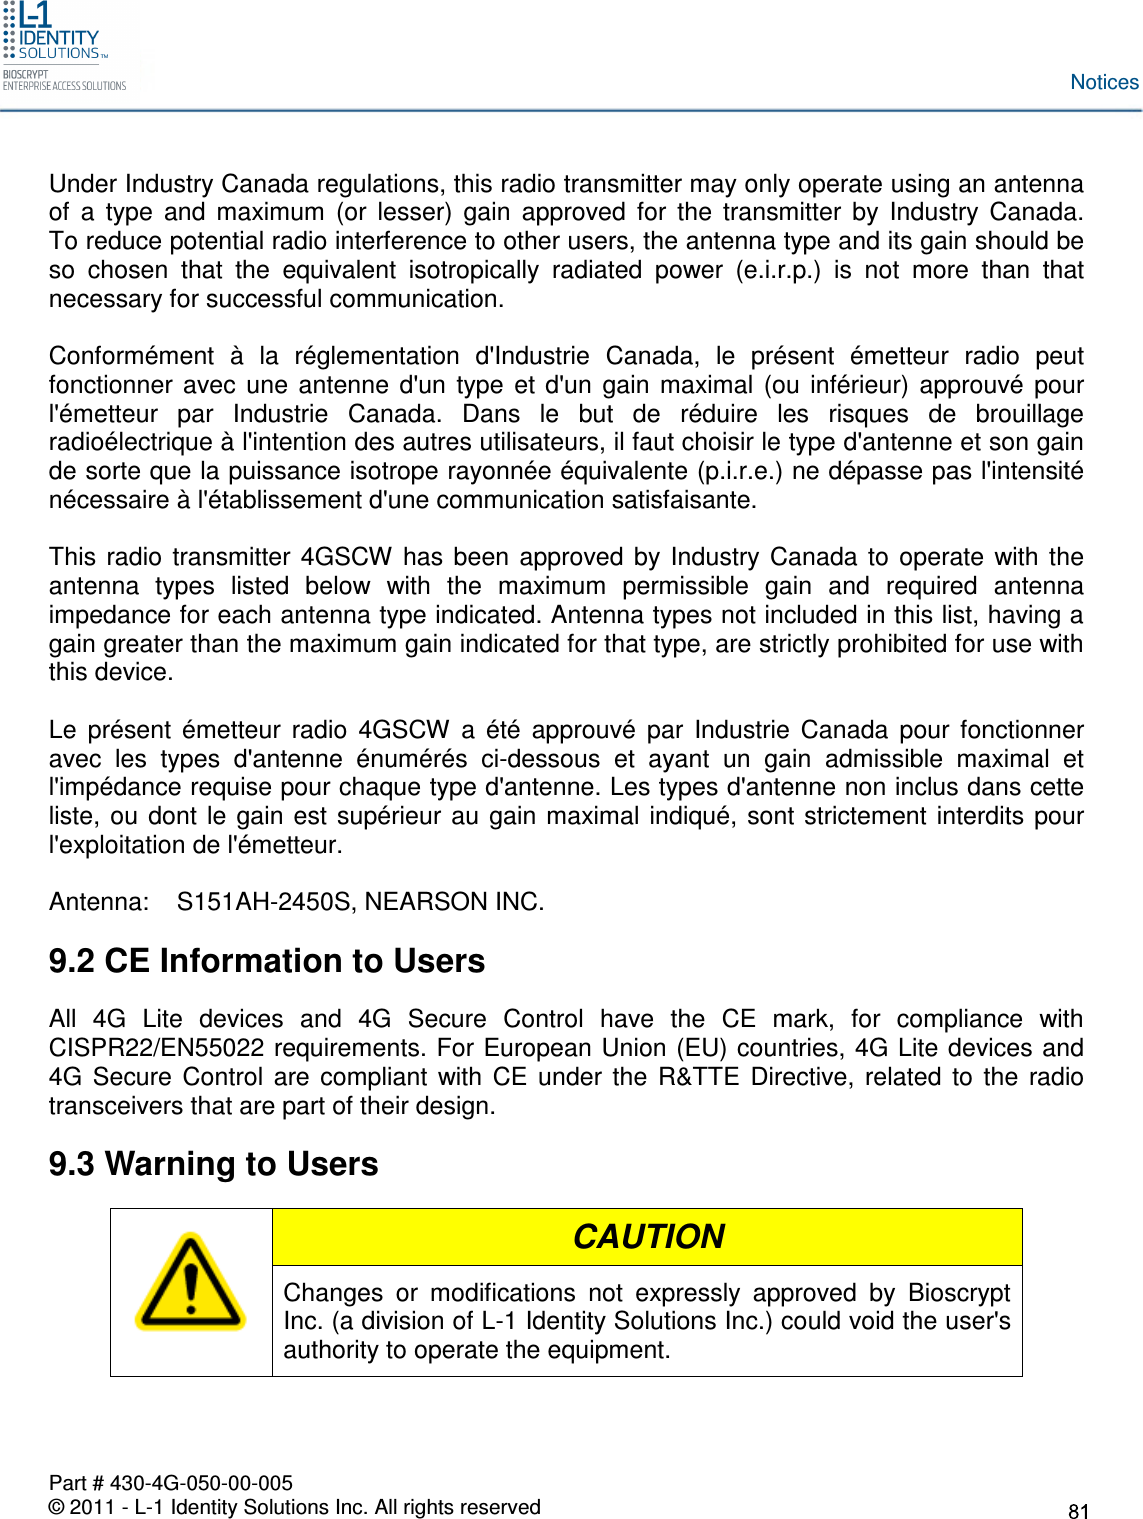  Part # 430-4G-050-00-005 © 2011 - L-1 Identity Solutions Inc. All rights reserved Notices Under Industry Canada regulations, this radio transmitter may only operate using an antenna of  a  type  and  maximum  (or  lesser)  gain  approved  for  the  transmitter  by  Industry  Canada.  To reduce potential radio interference to other users, the antenna type and its gain should be so  chosen  that  the  equivalent  isotropically  radiated  power  (e.i.r.p.)  is  not  more  than  that necessary for successful communication.  Conformément  à  la  réglementation  d&apos;Industrie  Canada,  le  présent  émetteur  radio  peut fonctionner  avec  une  antenne  d&apos;un  type  et  d&apos;un  gain  maximal  (ou  inférieur)  approuvé  pour l&apos;émetteur  par  Industrie  Canada.  Dans  le  but  de  réduire  les  risques  de  brouillage radioélectrique à l&apos;intention des autres utilisateurs, il faut choisir le type d&apos;antenne et son gain de sorte que la puissance isotrope rayonnée équivalente (p.i.r.e.) ne dépasse pas l&apos;intensité nécessaire à l&apos;établissement d&apos;une communication satisfaisante.  This  radio  transmitter  4GSCW  has  been  approved  by  Industry  Canada  to  operate  with  the antenna  types  listed  below  with  the  maximum  permissible  gain  and  required  antenna impedance for each antenna type indicated. Antenna types not included in this list, having a gain greater than the maximum gain indicated for that type, are strictly prohibited for use with this device.  Le  présent  émetteur  radio  4GSCW  a  été  approuvé  par  Industrie  Canada  pour  fonctionner avec  les  types  d&apos;antenne  énumérés  ci-dessous  et  ayant  un  gain  admissible  maximal  et l&apos;impédance requise pour chaque type d&apos;antenne. Les types d&apos;antenne non inclus dans cette liste,  ou  dont  le  gain  est  supérieur  au  gain maximal  indiqué,  sont strictement  interdits  pour l&apos;exploitation de l&apos;émetteur.  Antenna:    S151AH-2450S, NEARSON INC. 9.2 CE Information to Users All  4G  Lite  devices  and  4G  Secure  Control  have  the  CE  mark,  for  compliance  with CISPR22/EN55022 requirements. For European Union (EU) countries, 4G Lite devices and 4G  Secure  Control  are  compliant  with  CE  under  the  R&amp;TTE  Directive,  related  to  the  radio transceivers that are part of their design. 9.3 Warning to Users  CAUTION Changes  or  modifications  not  expressly  approved  by  Bioscrypt Inc. (a division of L-1 Identity Solutions Inc.) could void the user&apos;s authority to operate the equipment.  